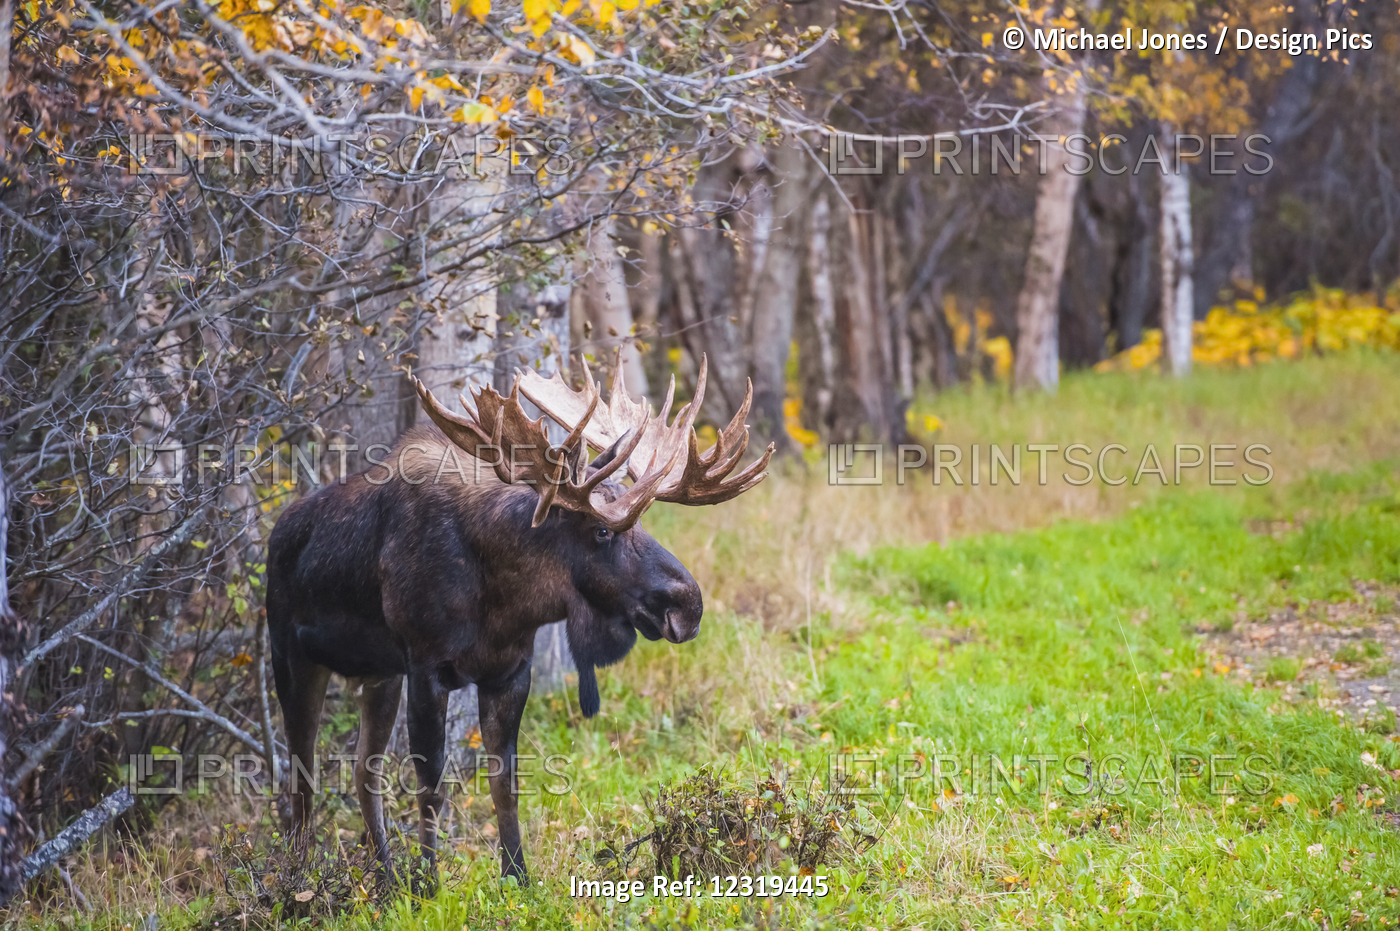 The Large Bull Moose Known As "hook" Who Roams In The Kincade Park Area Is Seen ...